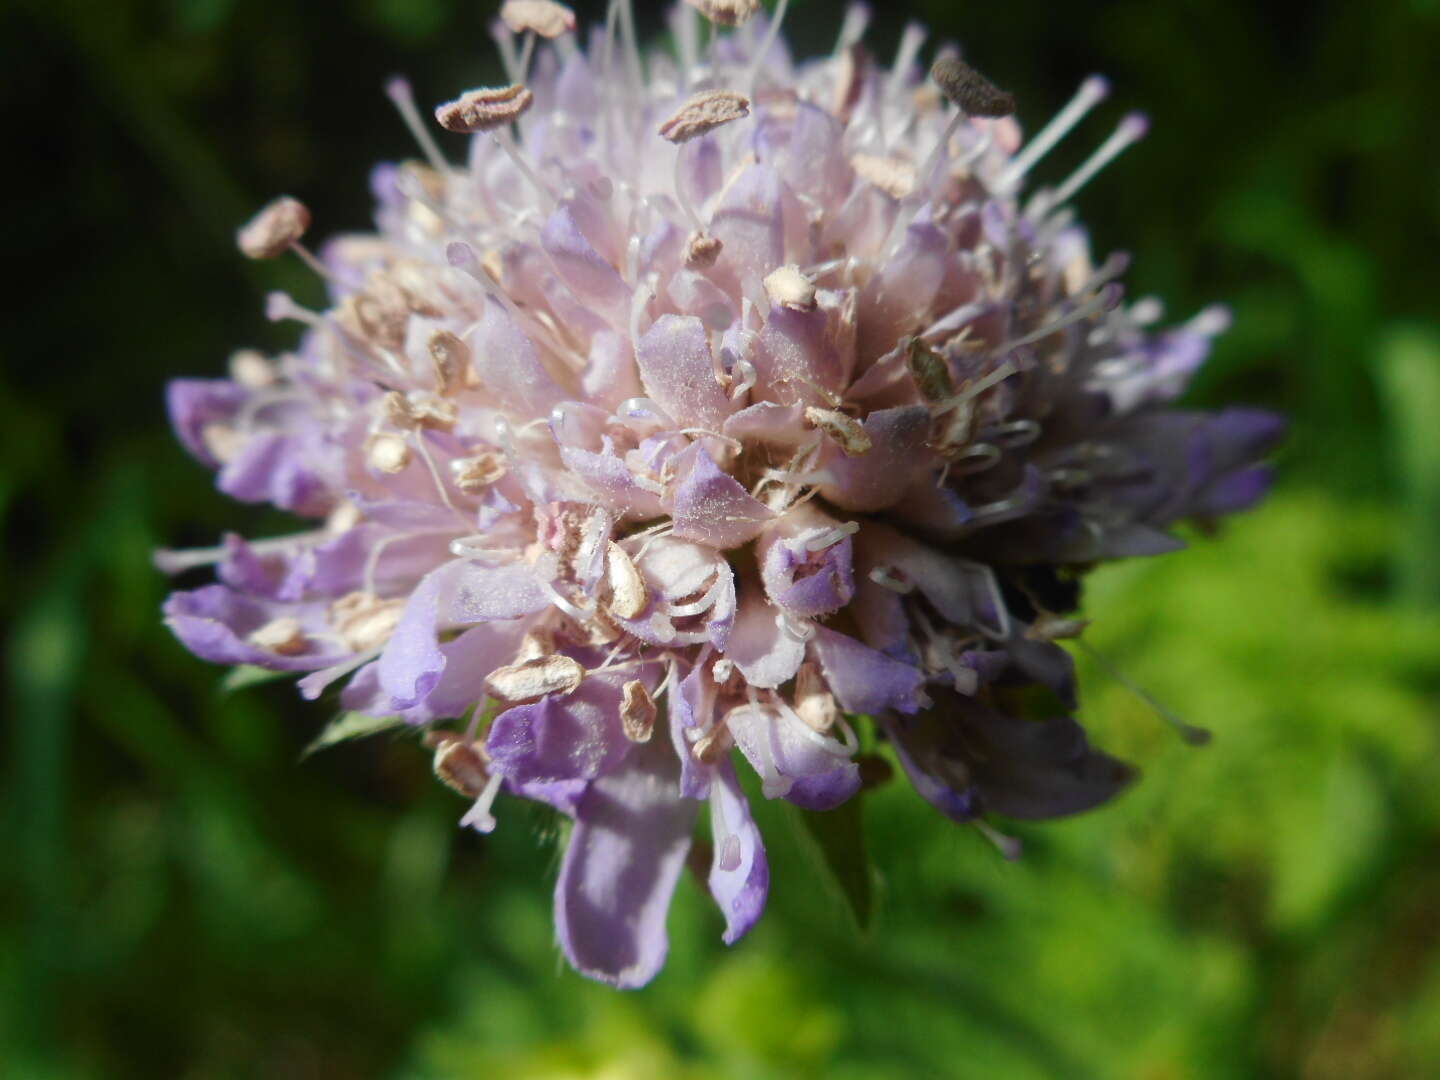 Image of Microbotryum scabiosae (Sowerby) G. Deml & Prillinger 1991